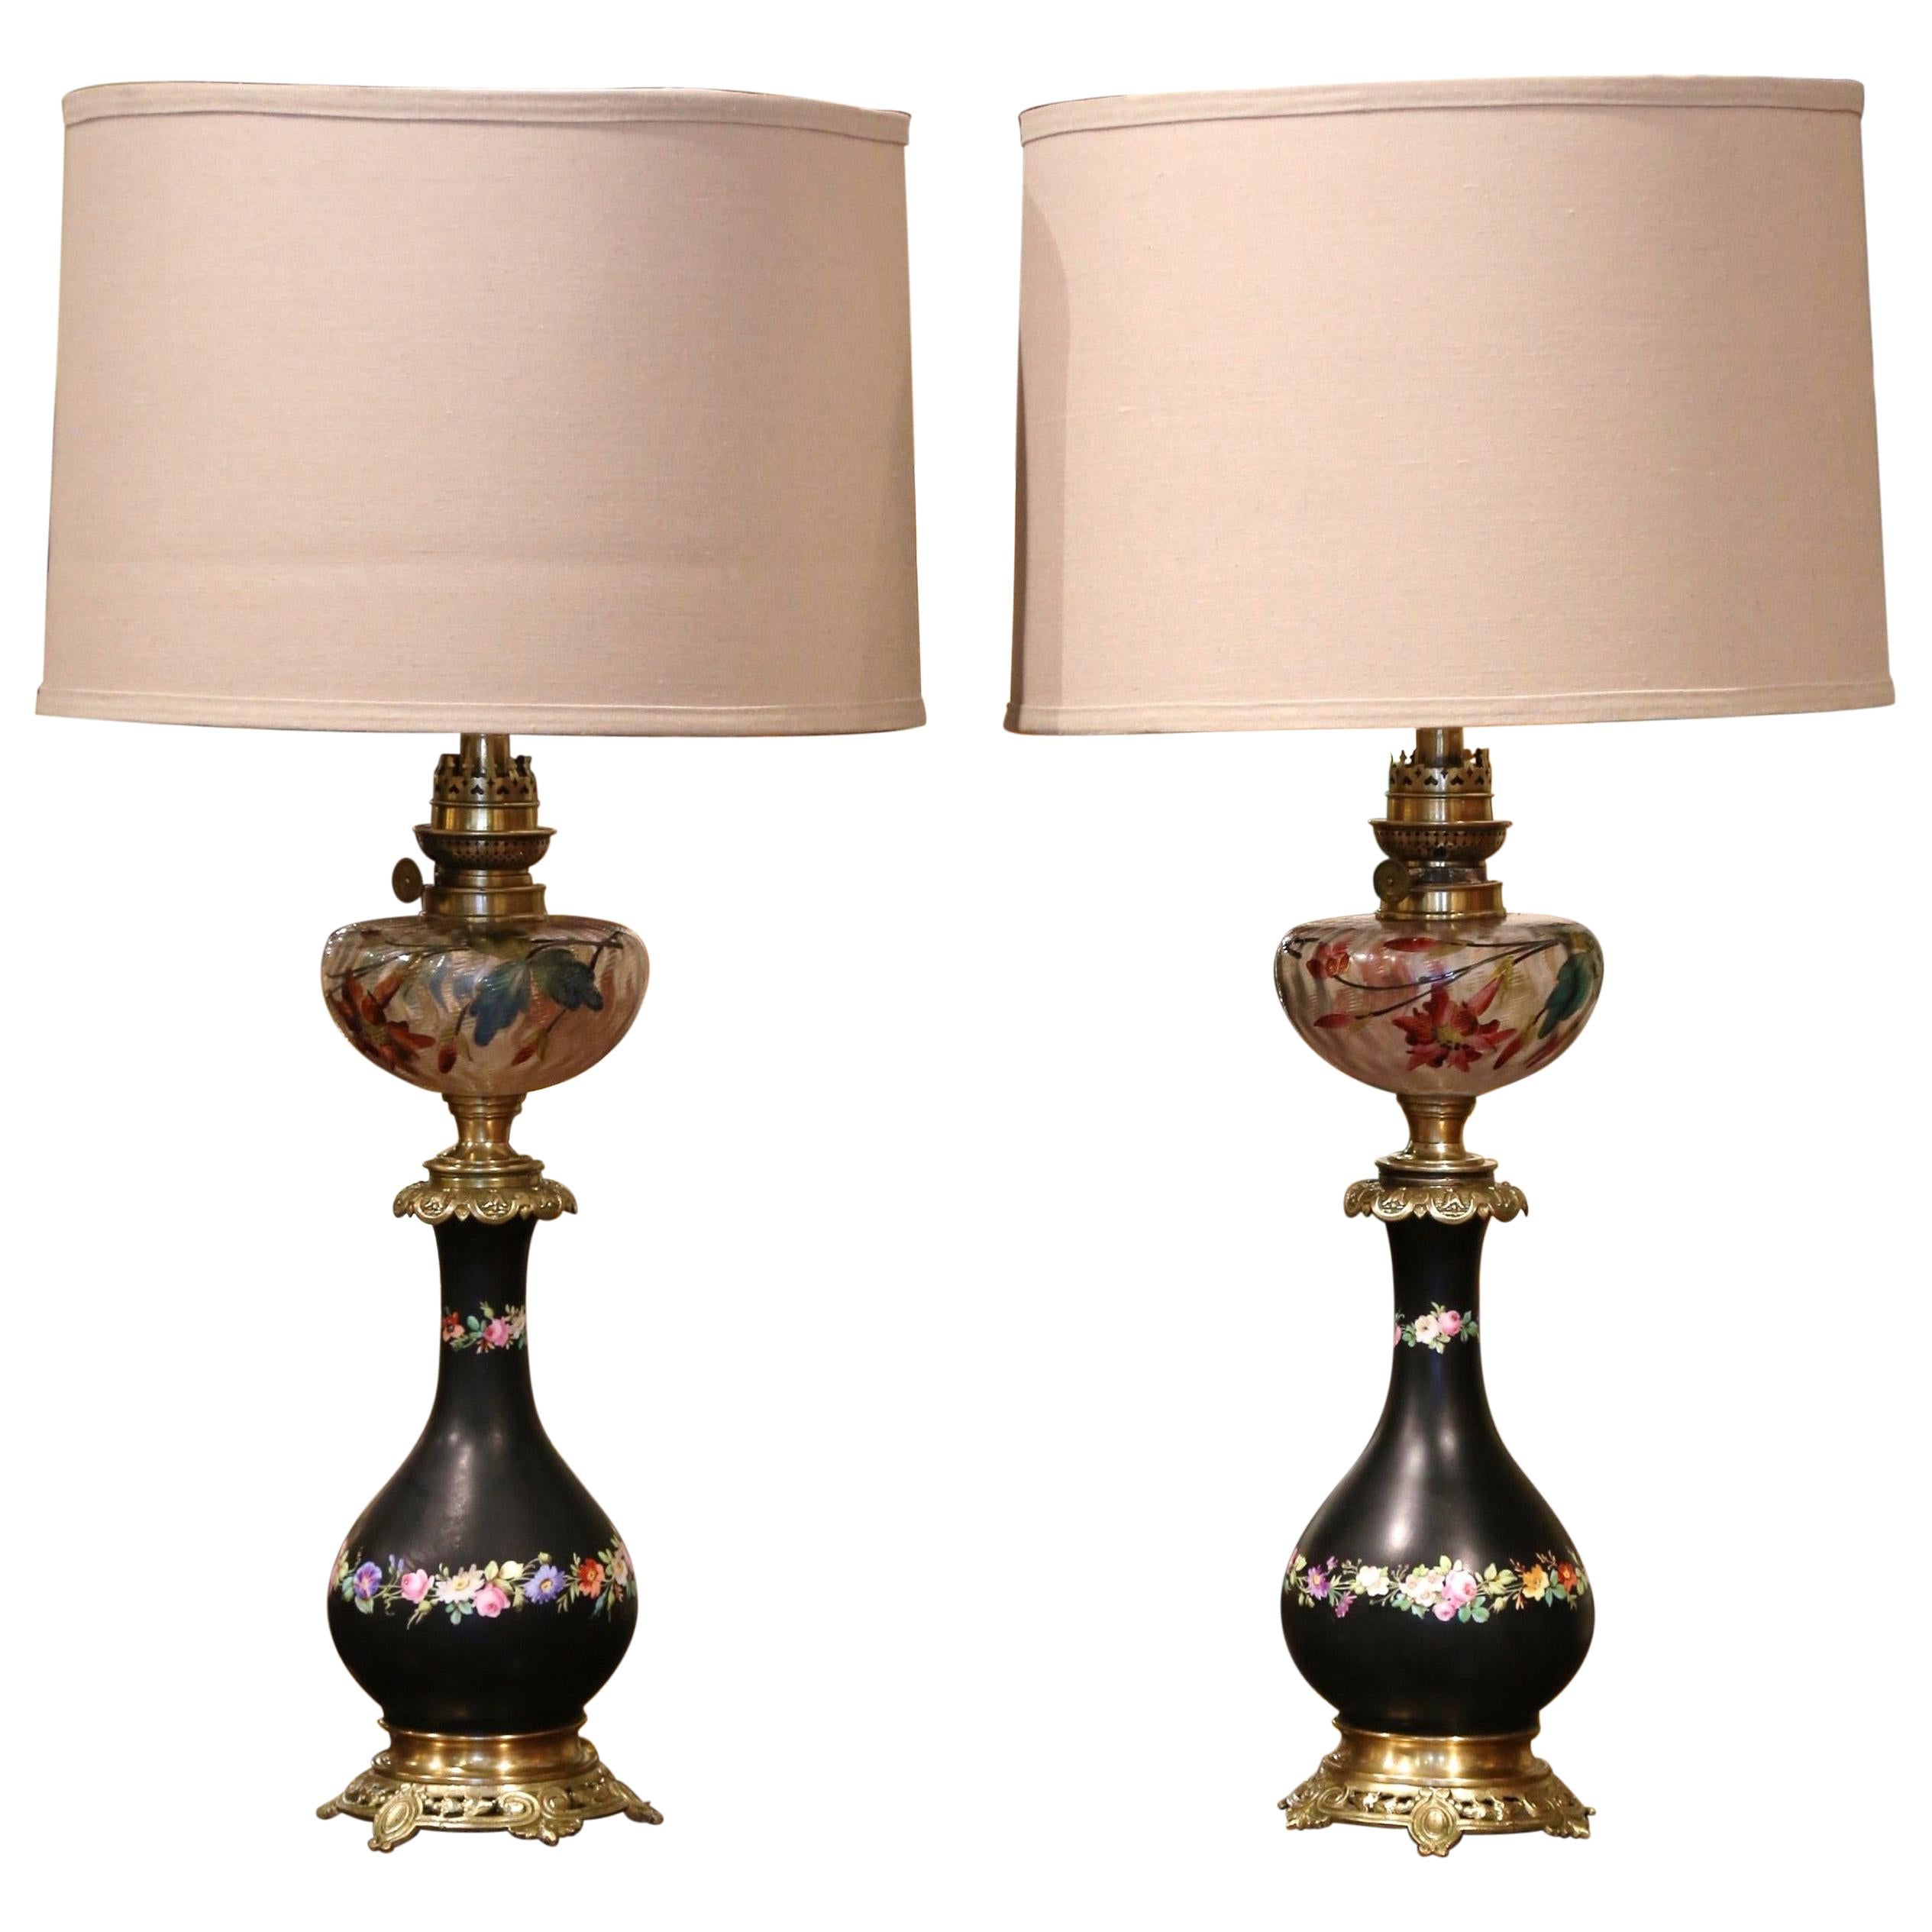 Pair of 19th Century French Porcelain Brass and Painted Glass Table Lamps For Sale